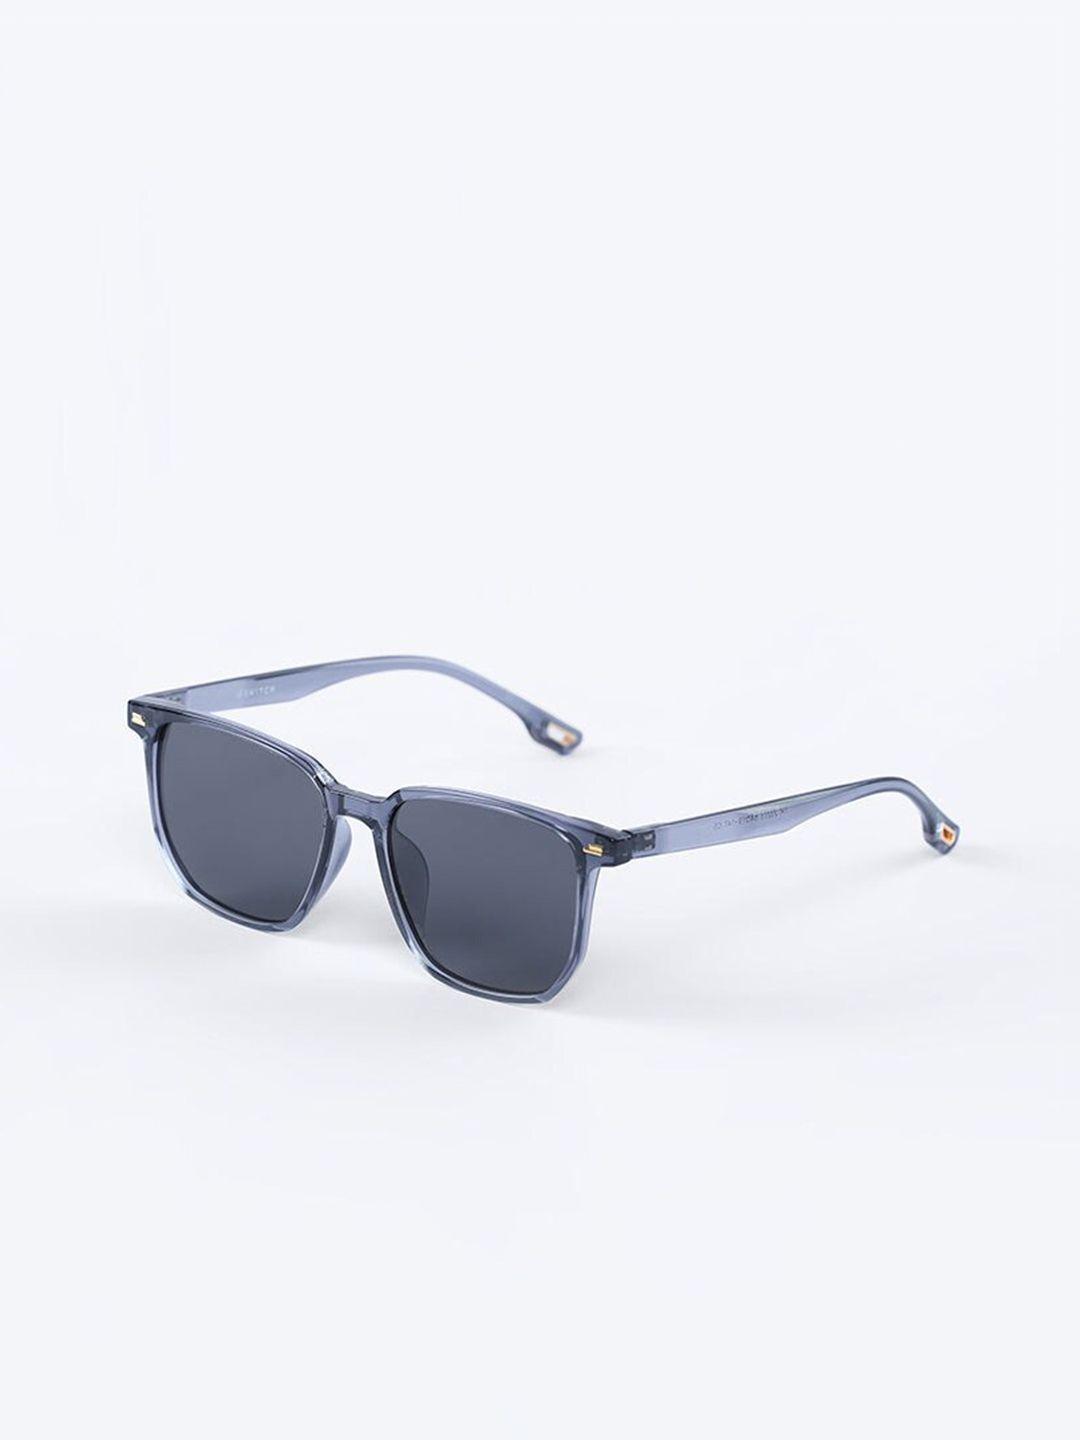 Snitch Men Blue Square Sunglasses with UV Protected Lens Sunglasses